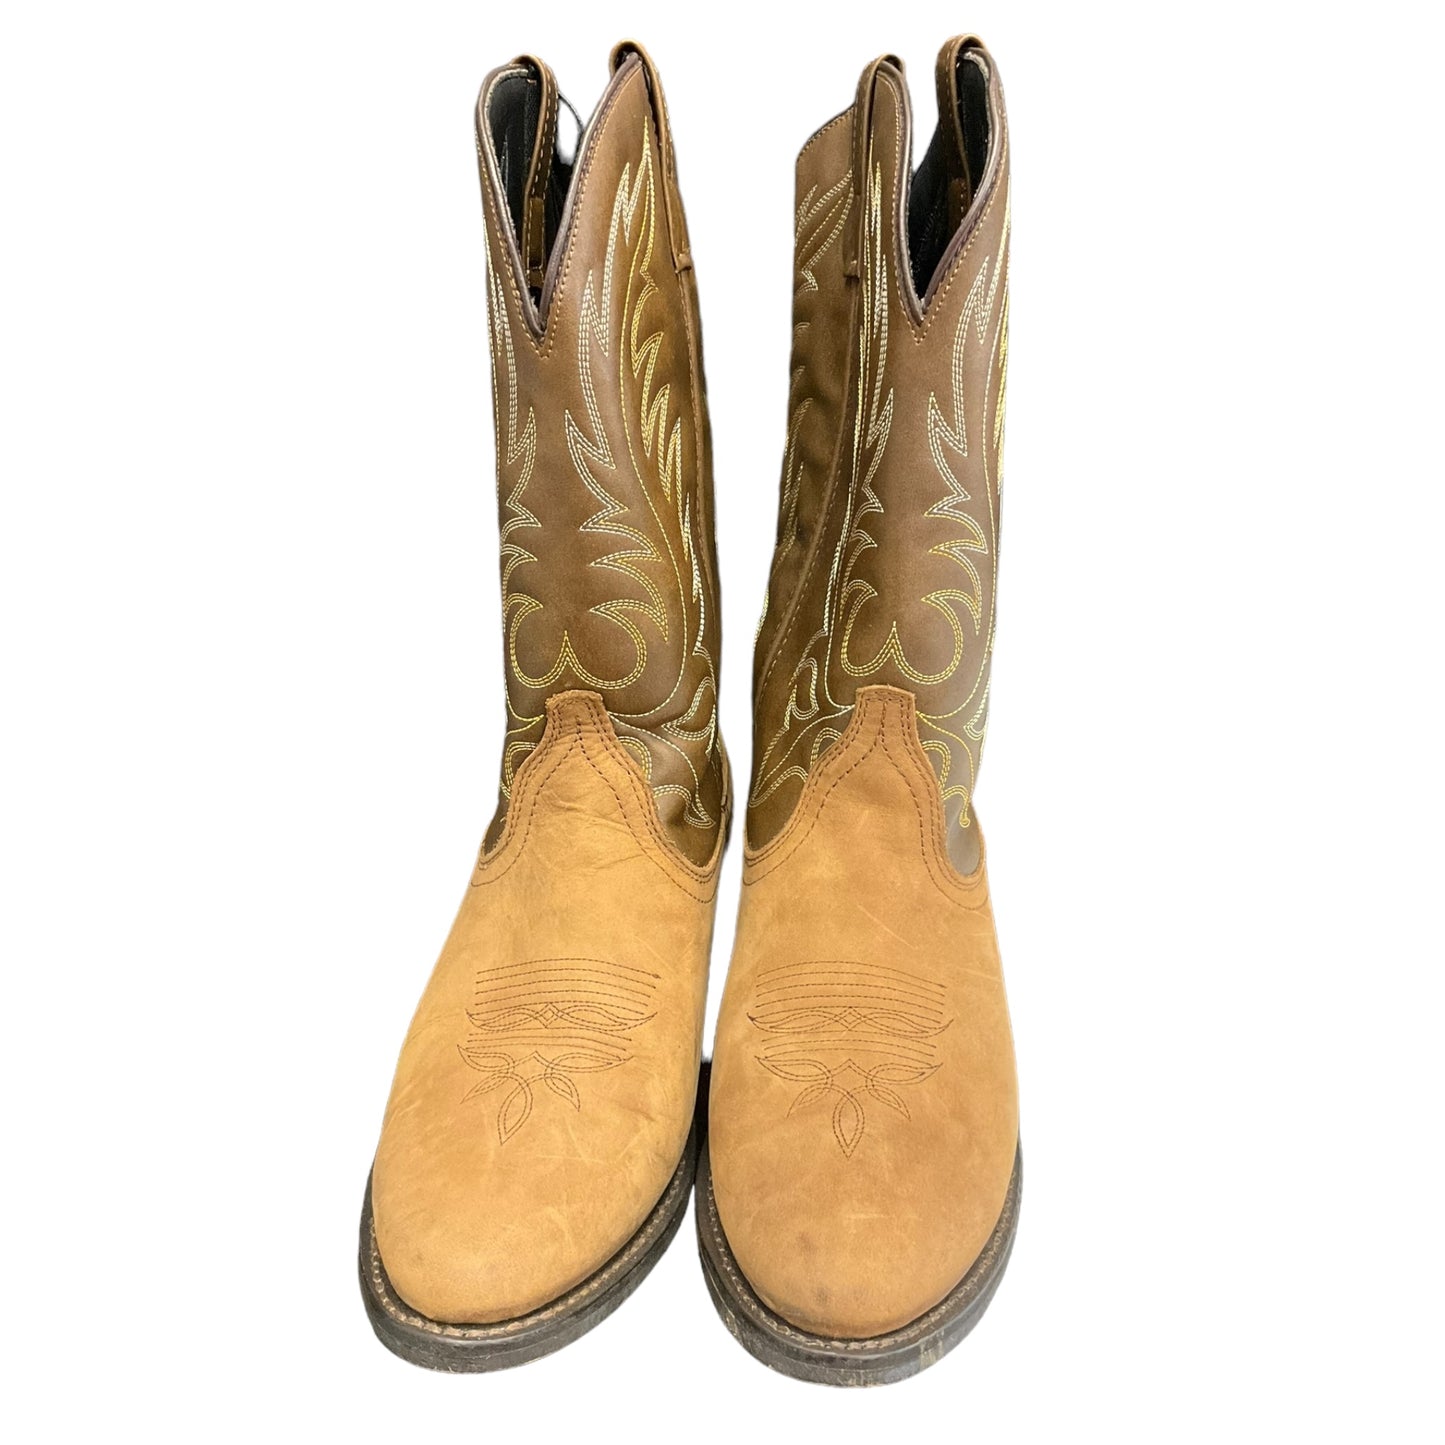 Boots Western By Laredo  Size: 8.5